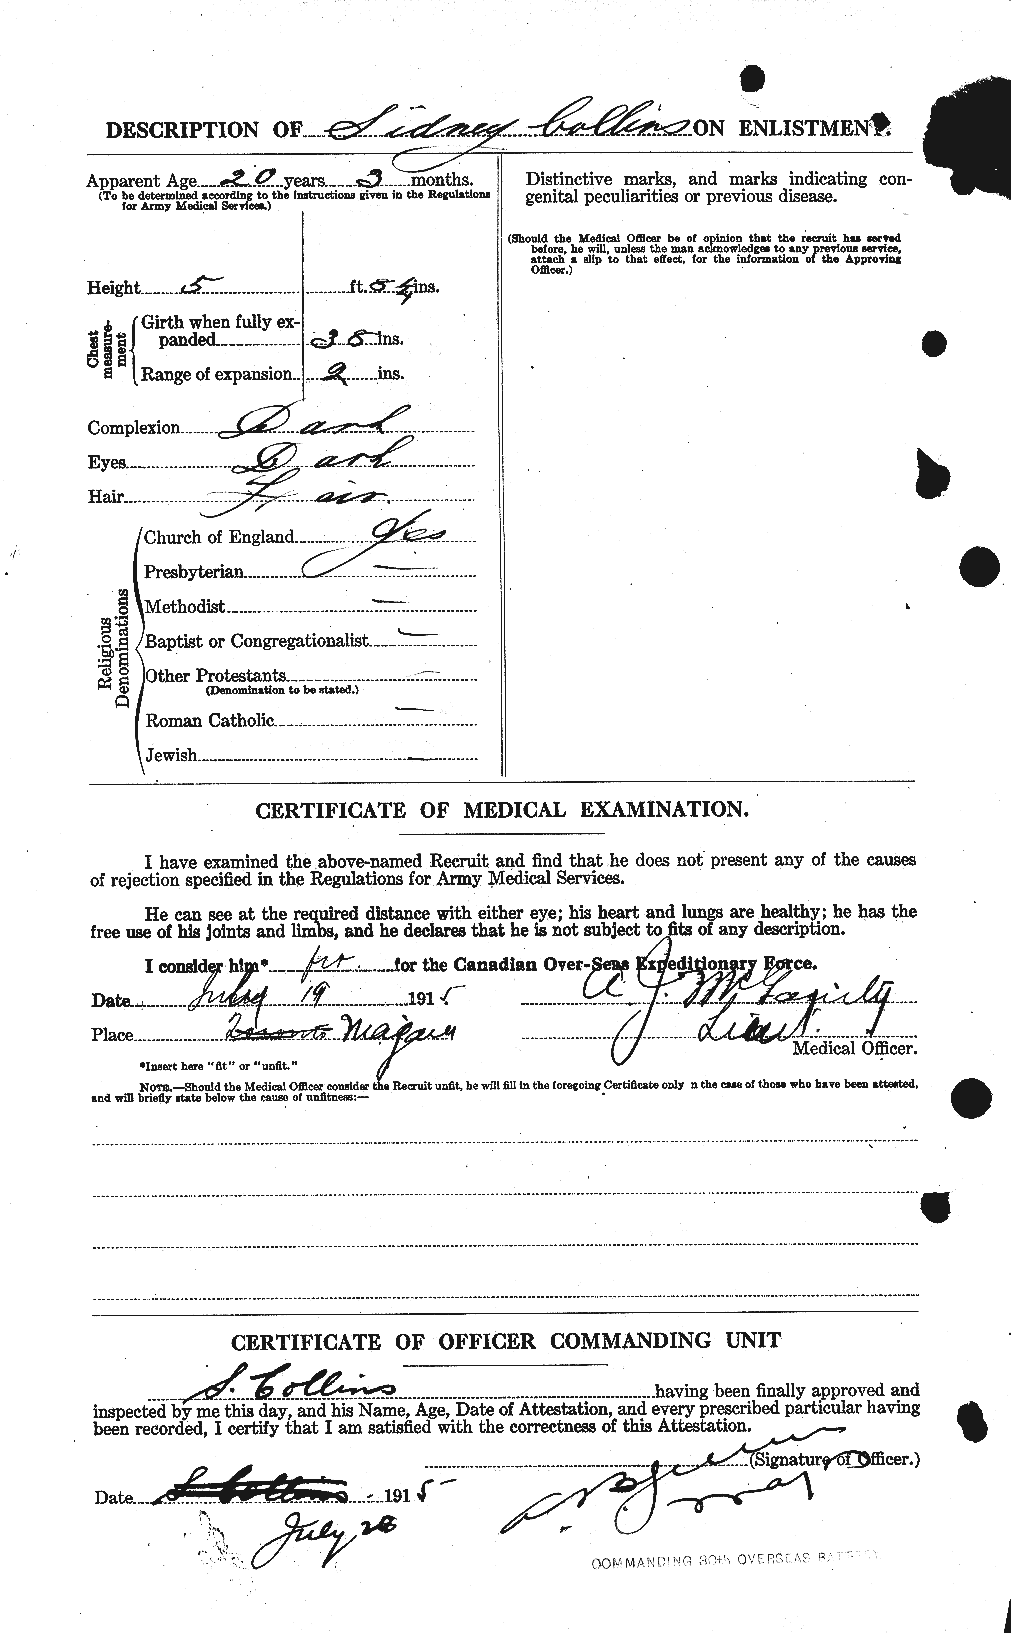 Personnel Records of the First World War - CEF 069157b